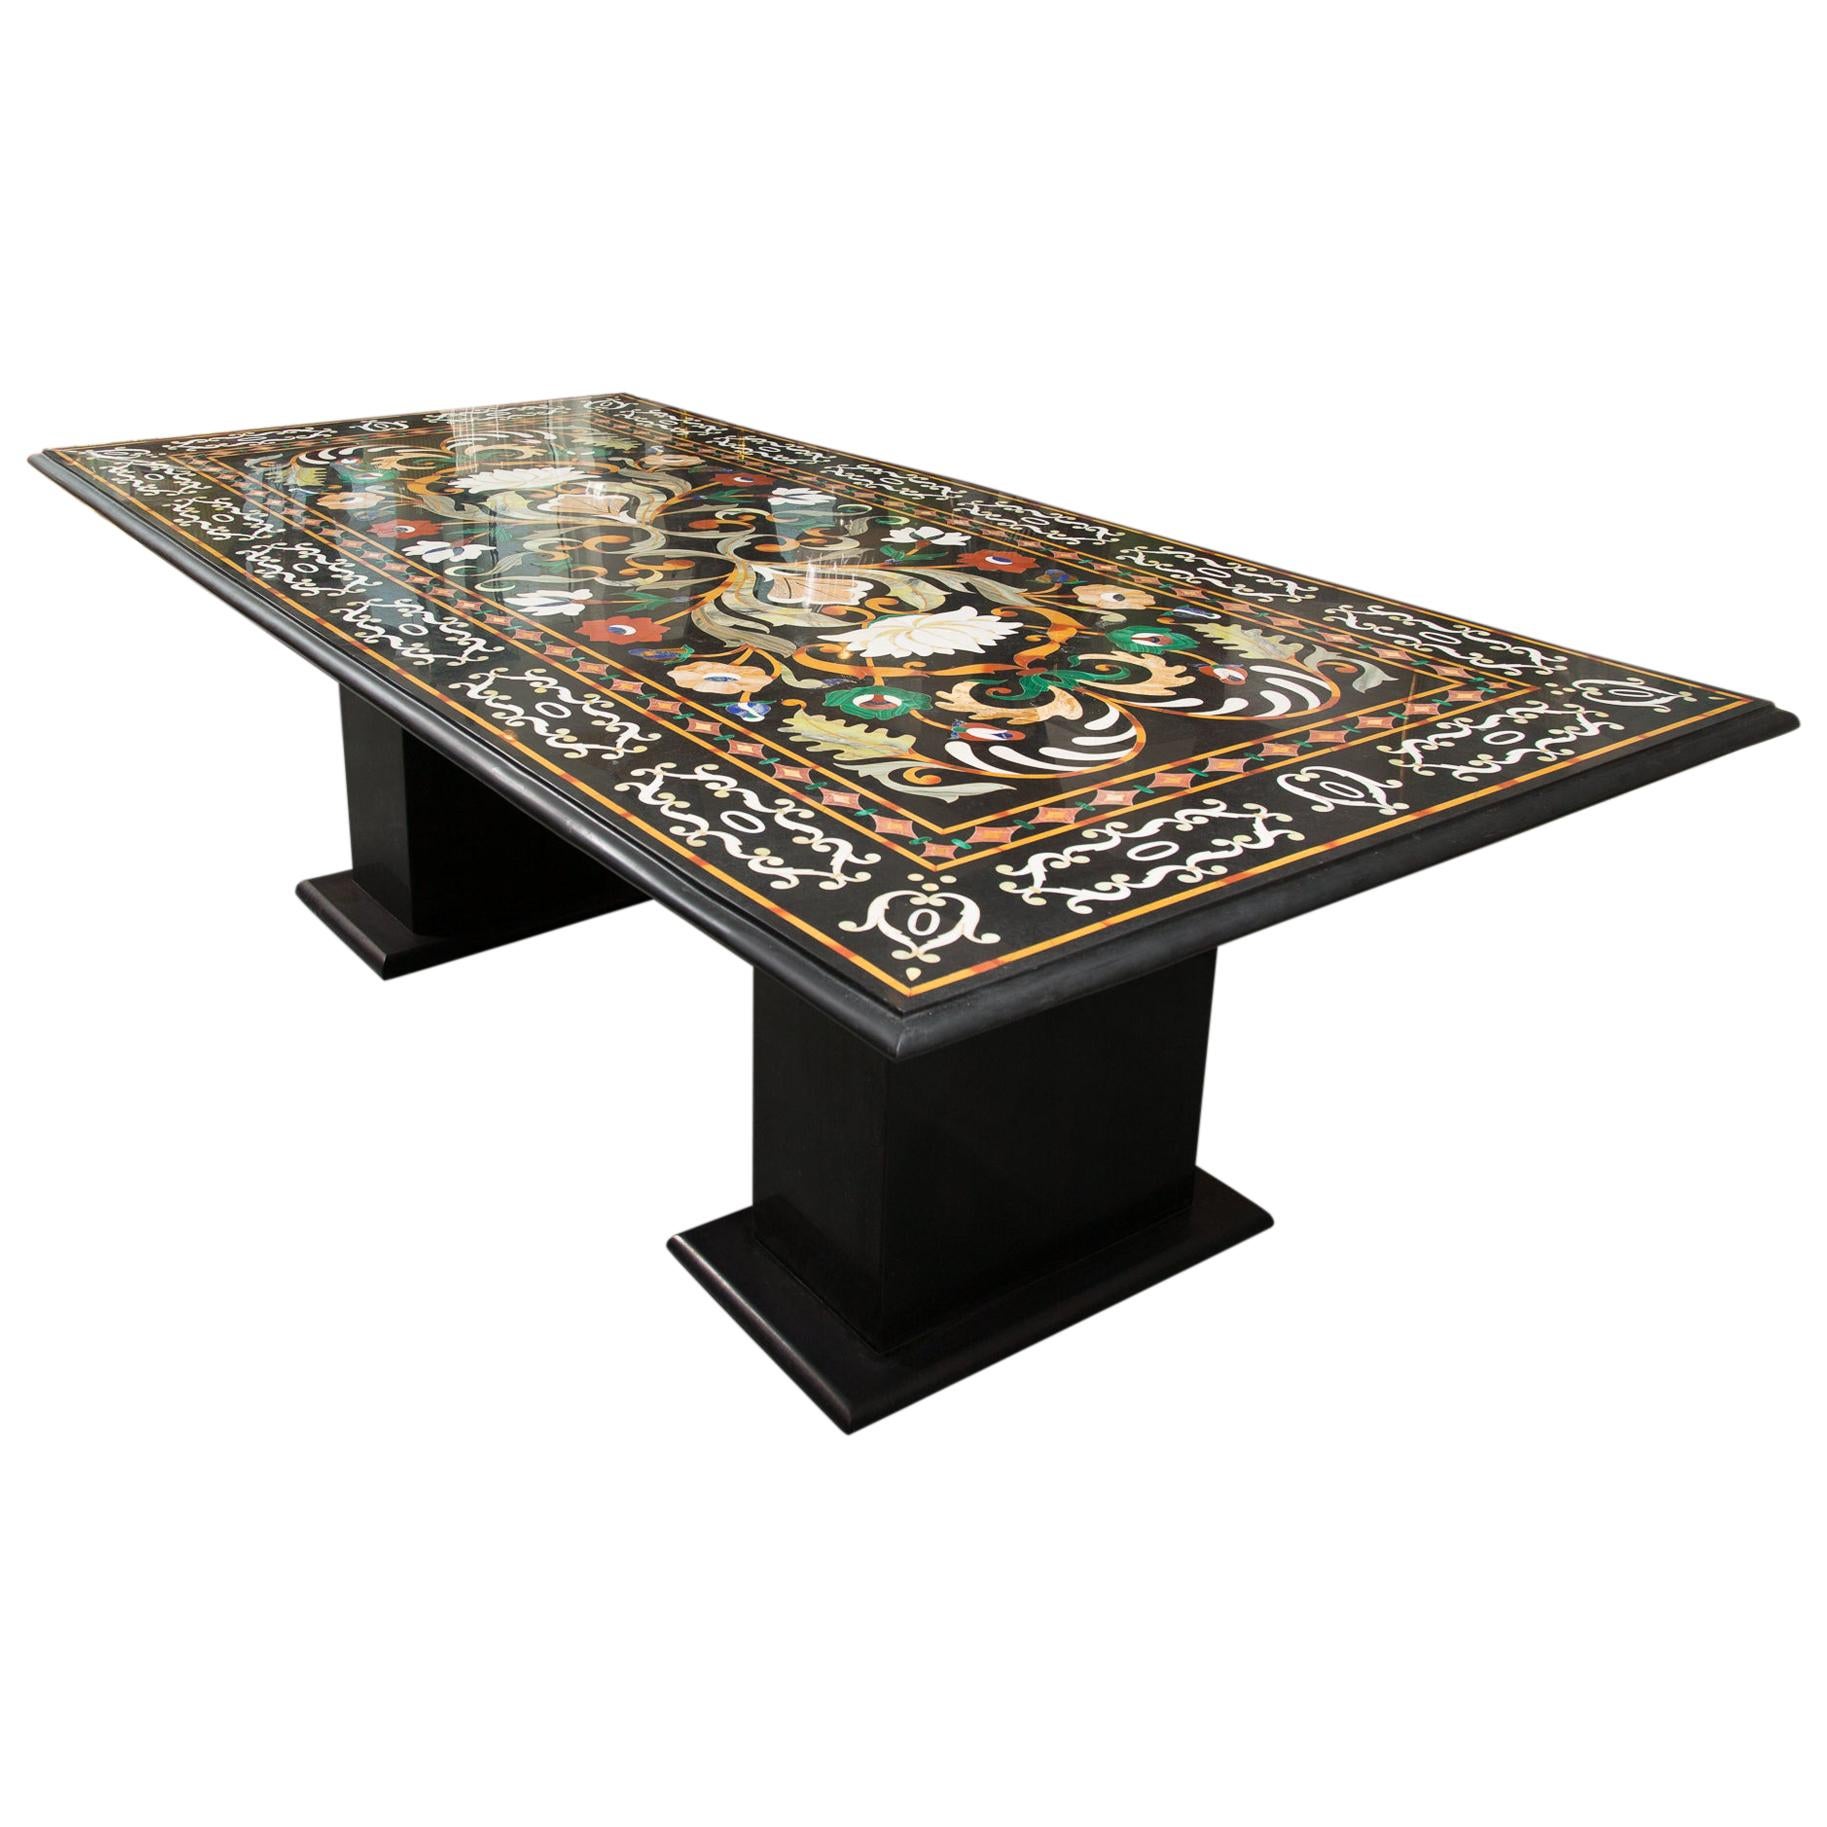 Italian Pietra Dura Marble Table and Plinths